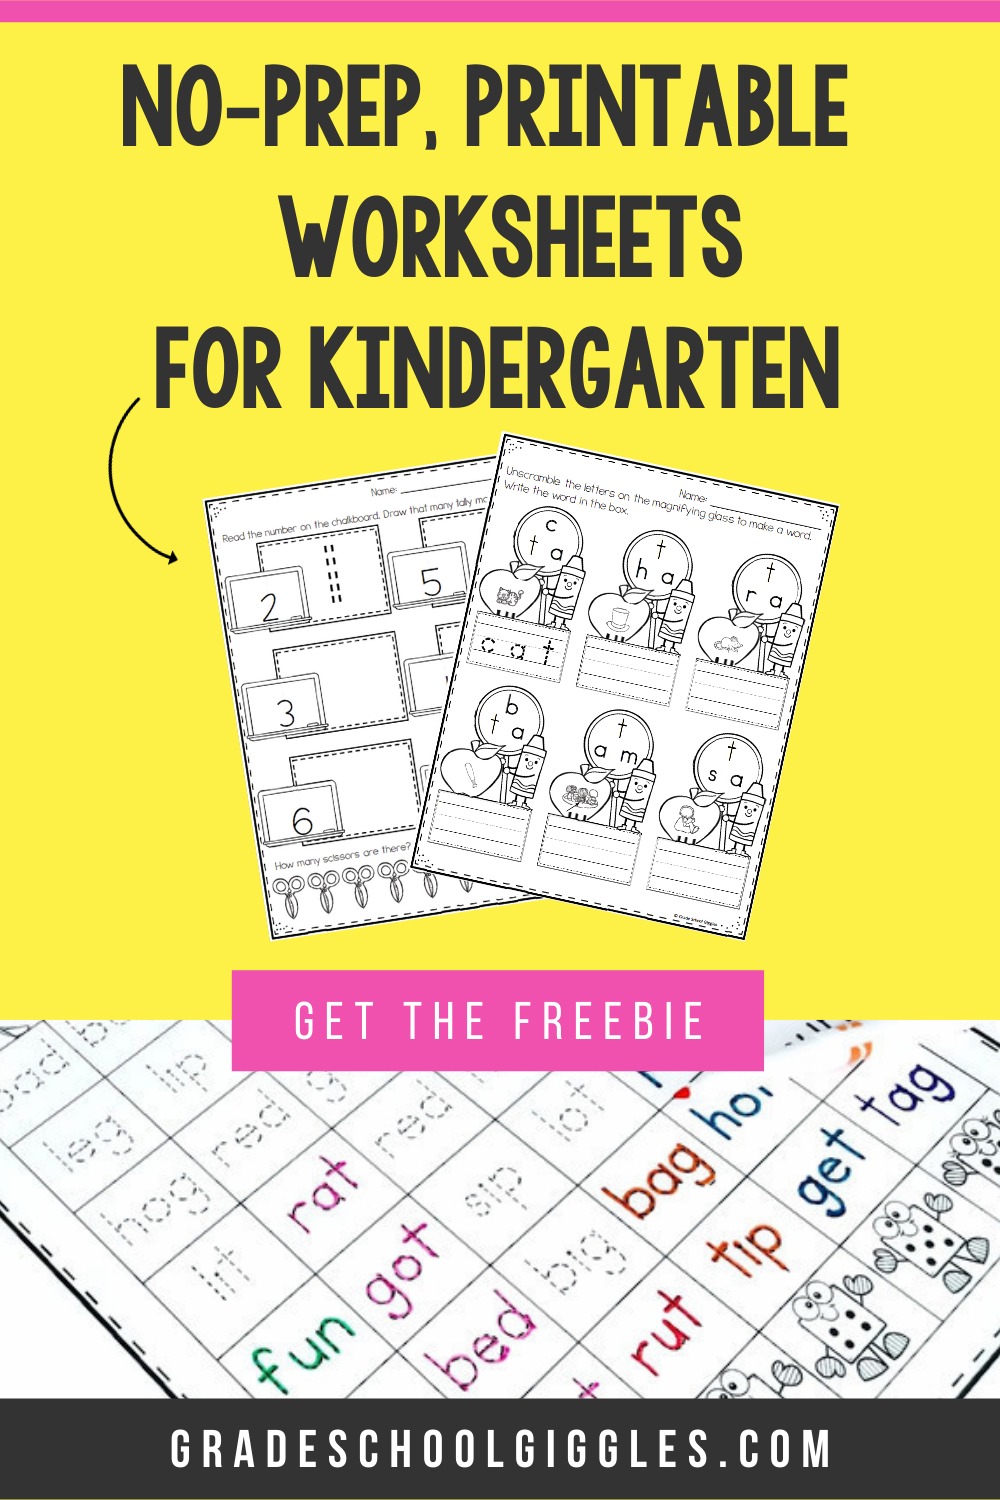 6 Secrets For Getting The Most Out Of No-Prep Printable Worksheets ...